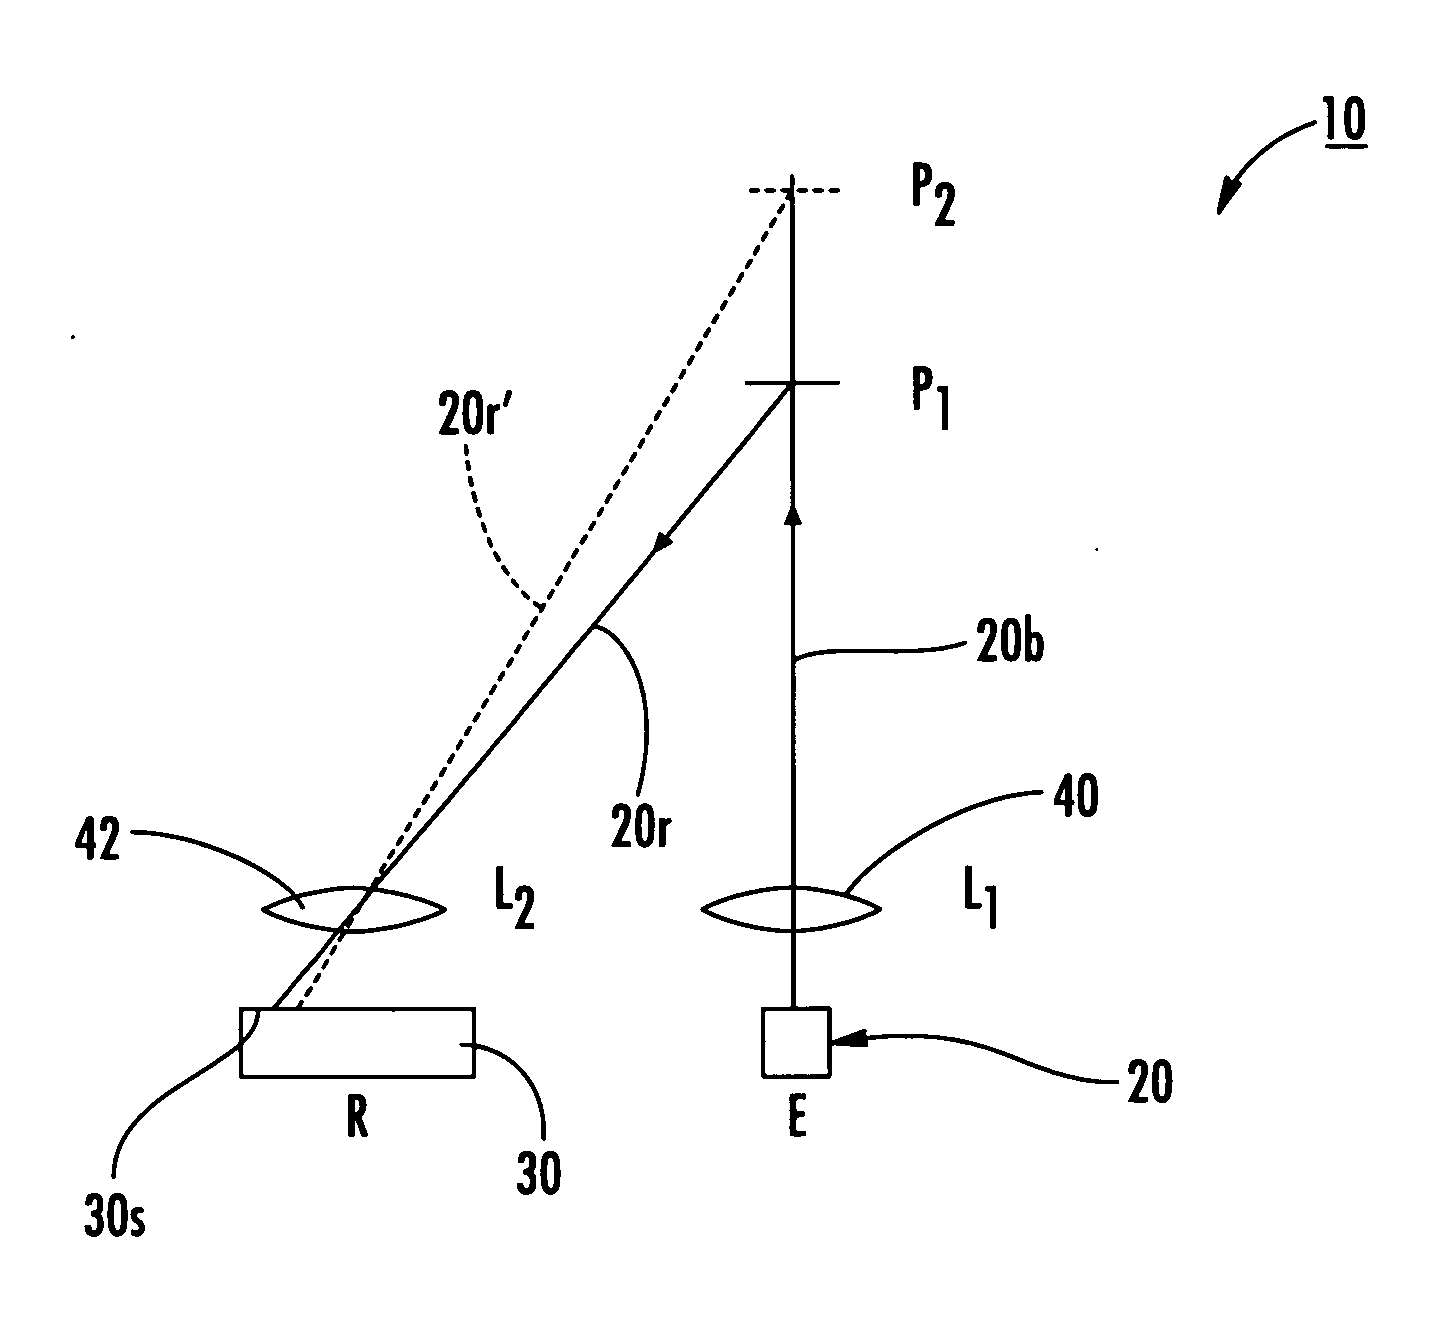 Digital cameras with triangulation autofocus systems and related methods